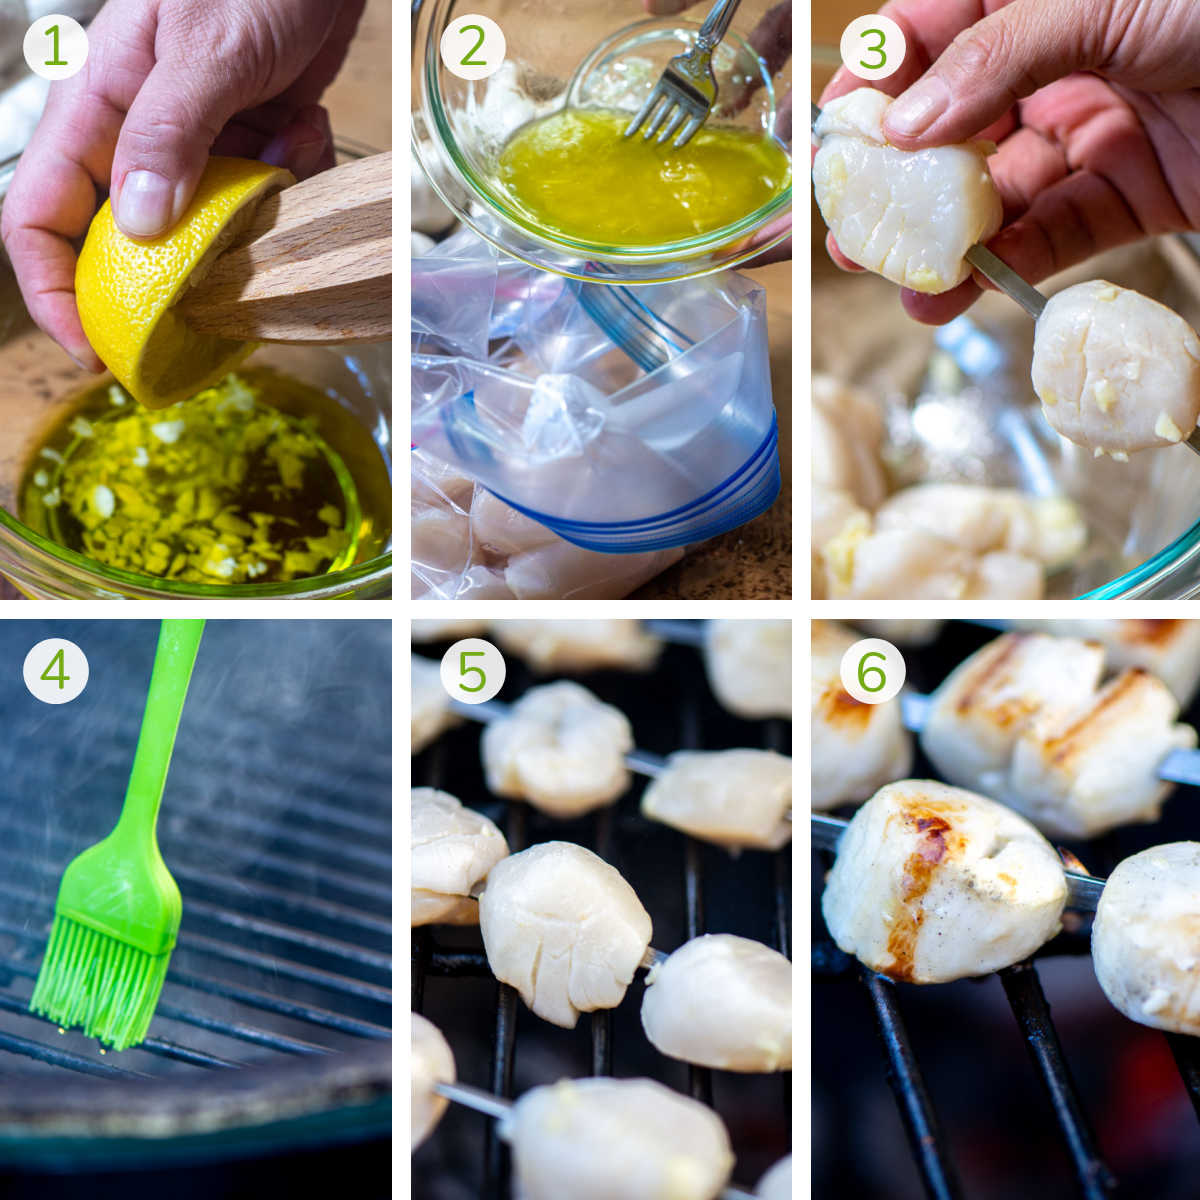 six process photos showing making the marinade, adding the scallops to the Ziploc bag, adding them to skewers, and then preparing and grilling.